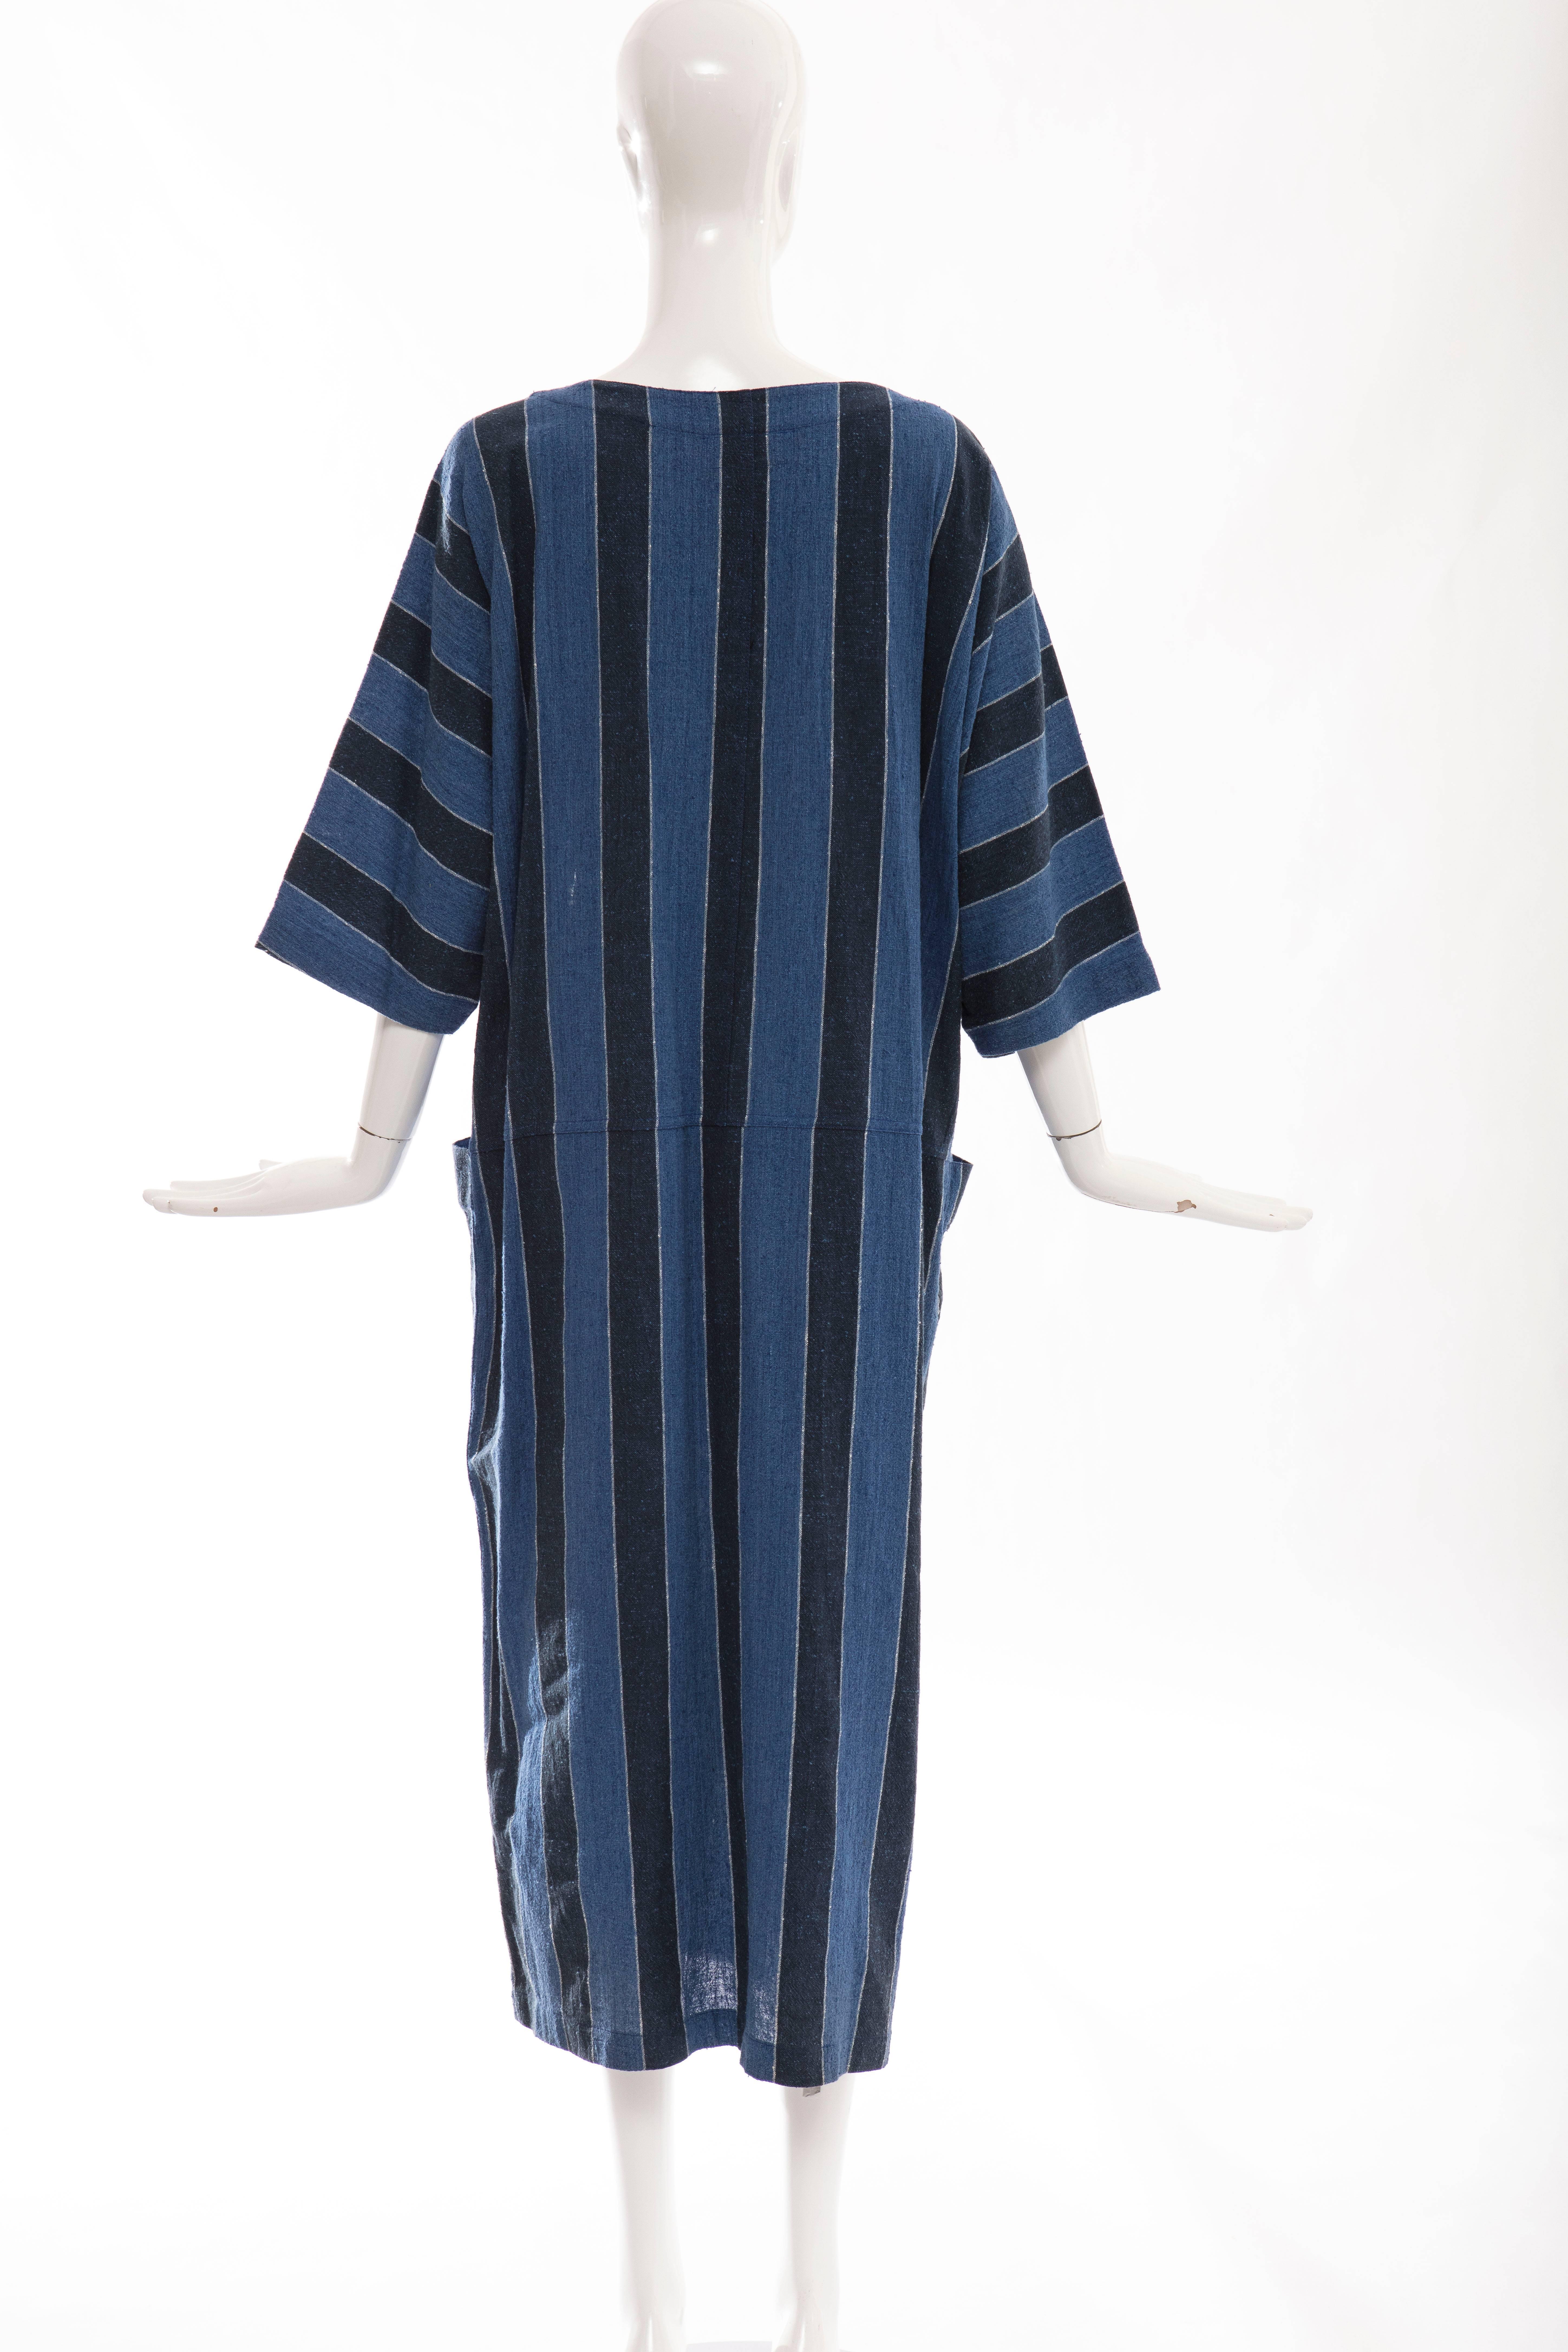 issey Miyake Plantation, circa 1980's blue striped woven cotton dress with boat neck and two deep front pockets.

Japan: Medium

Bust 48, Waist 44, Hips 44, Length 49